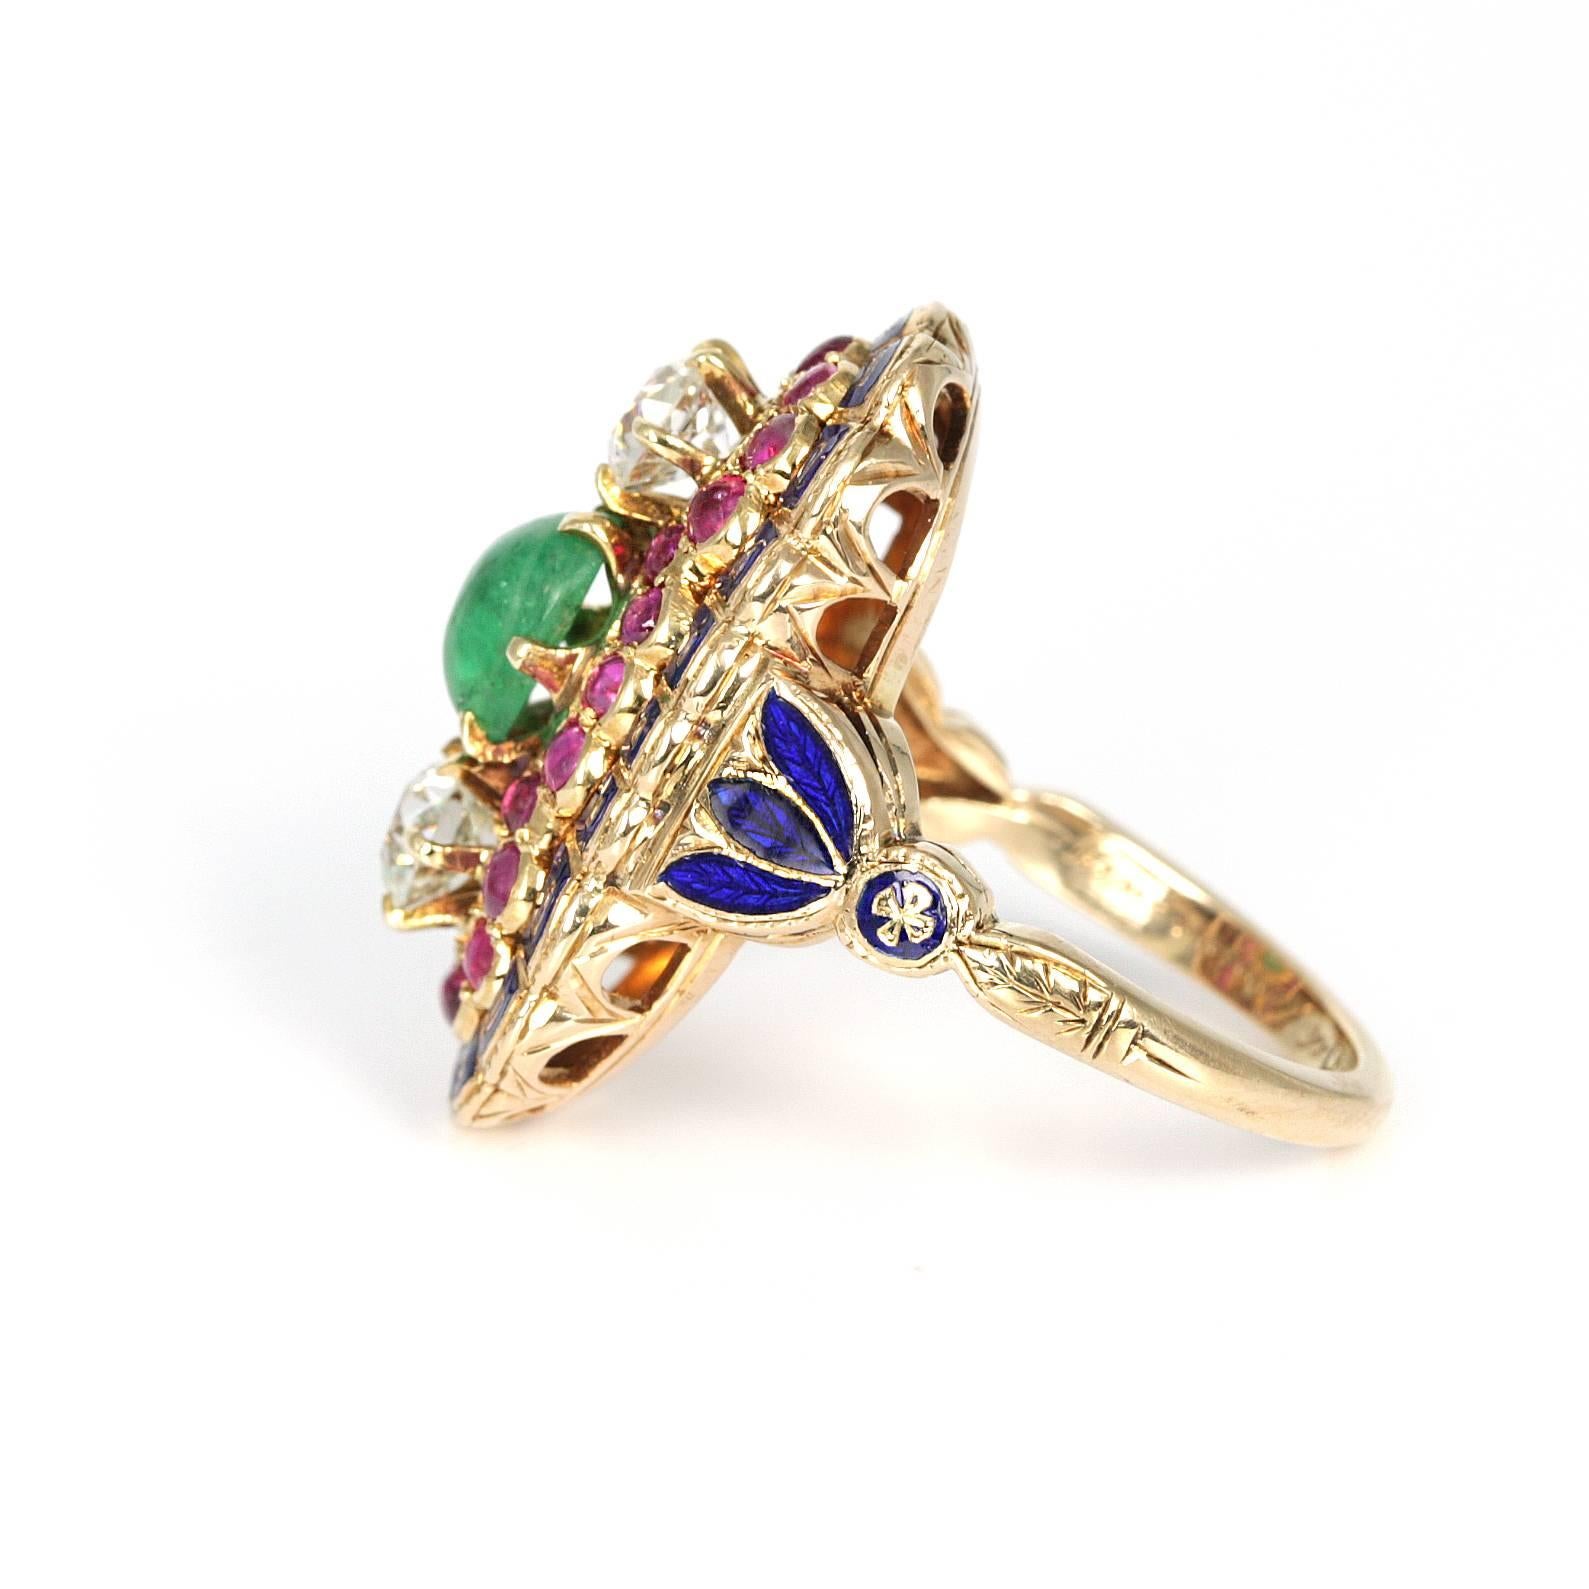 Old Mine Cut Unique Edwardian 18 Karat Gold Diamond and Cabochon Emerald and Ruby Ring For Sale